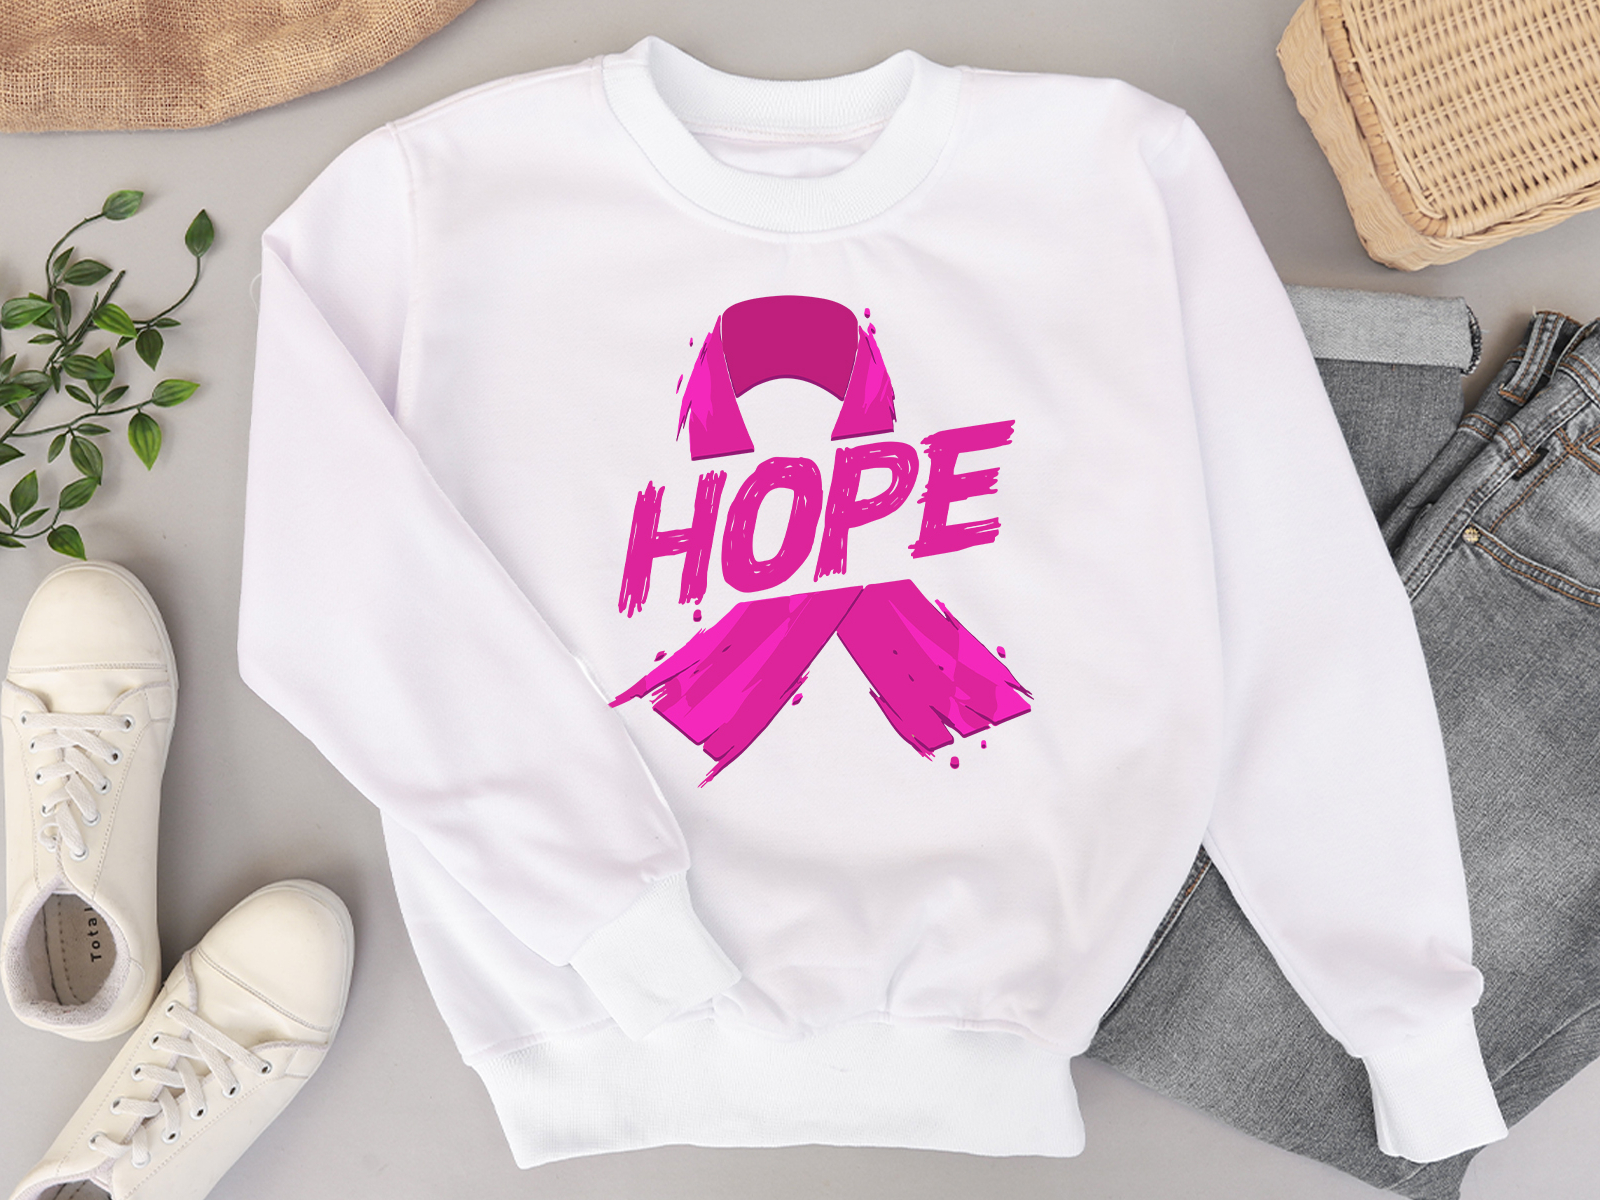 T-shirt Designs for Breast Cancer Awareness on Behance